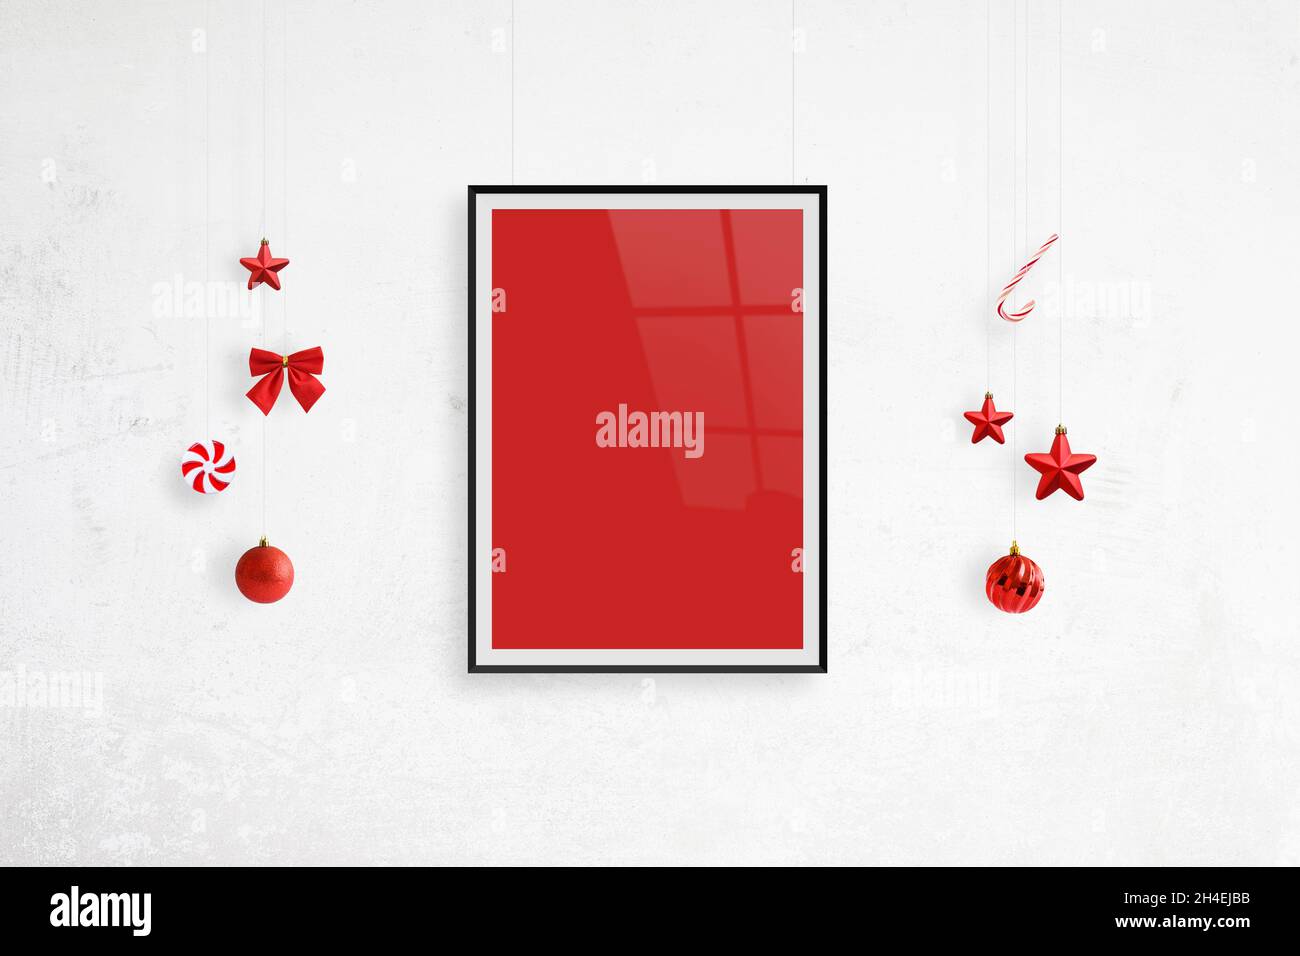 Hanging poster frame mockup surrounded by Christmas decorations. Blank poster frame for greeting text Stock Photo